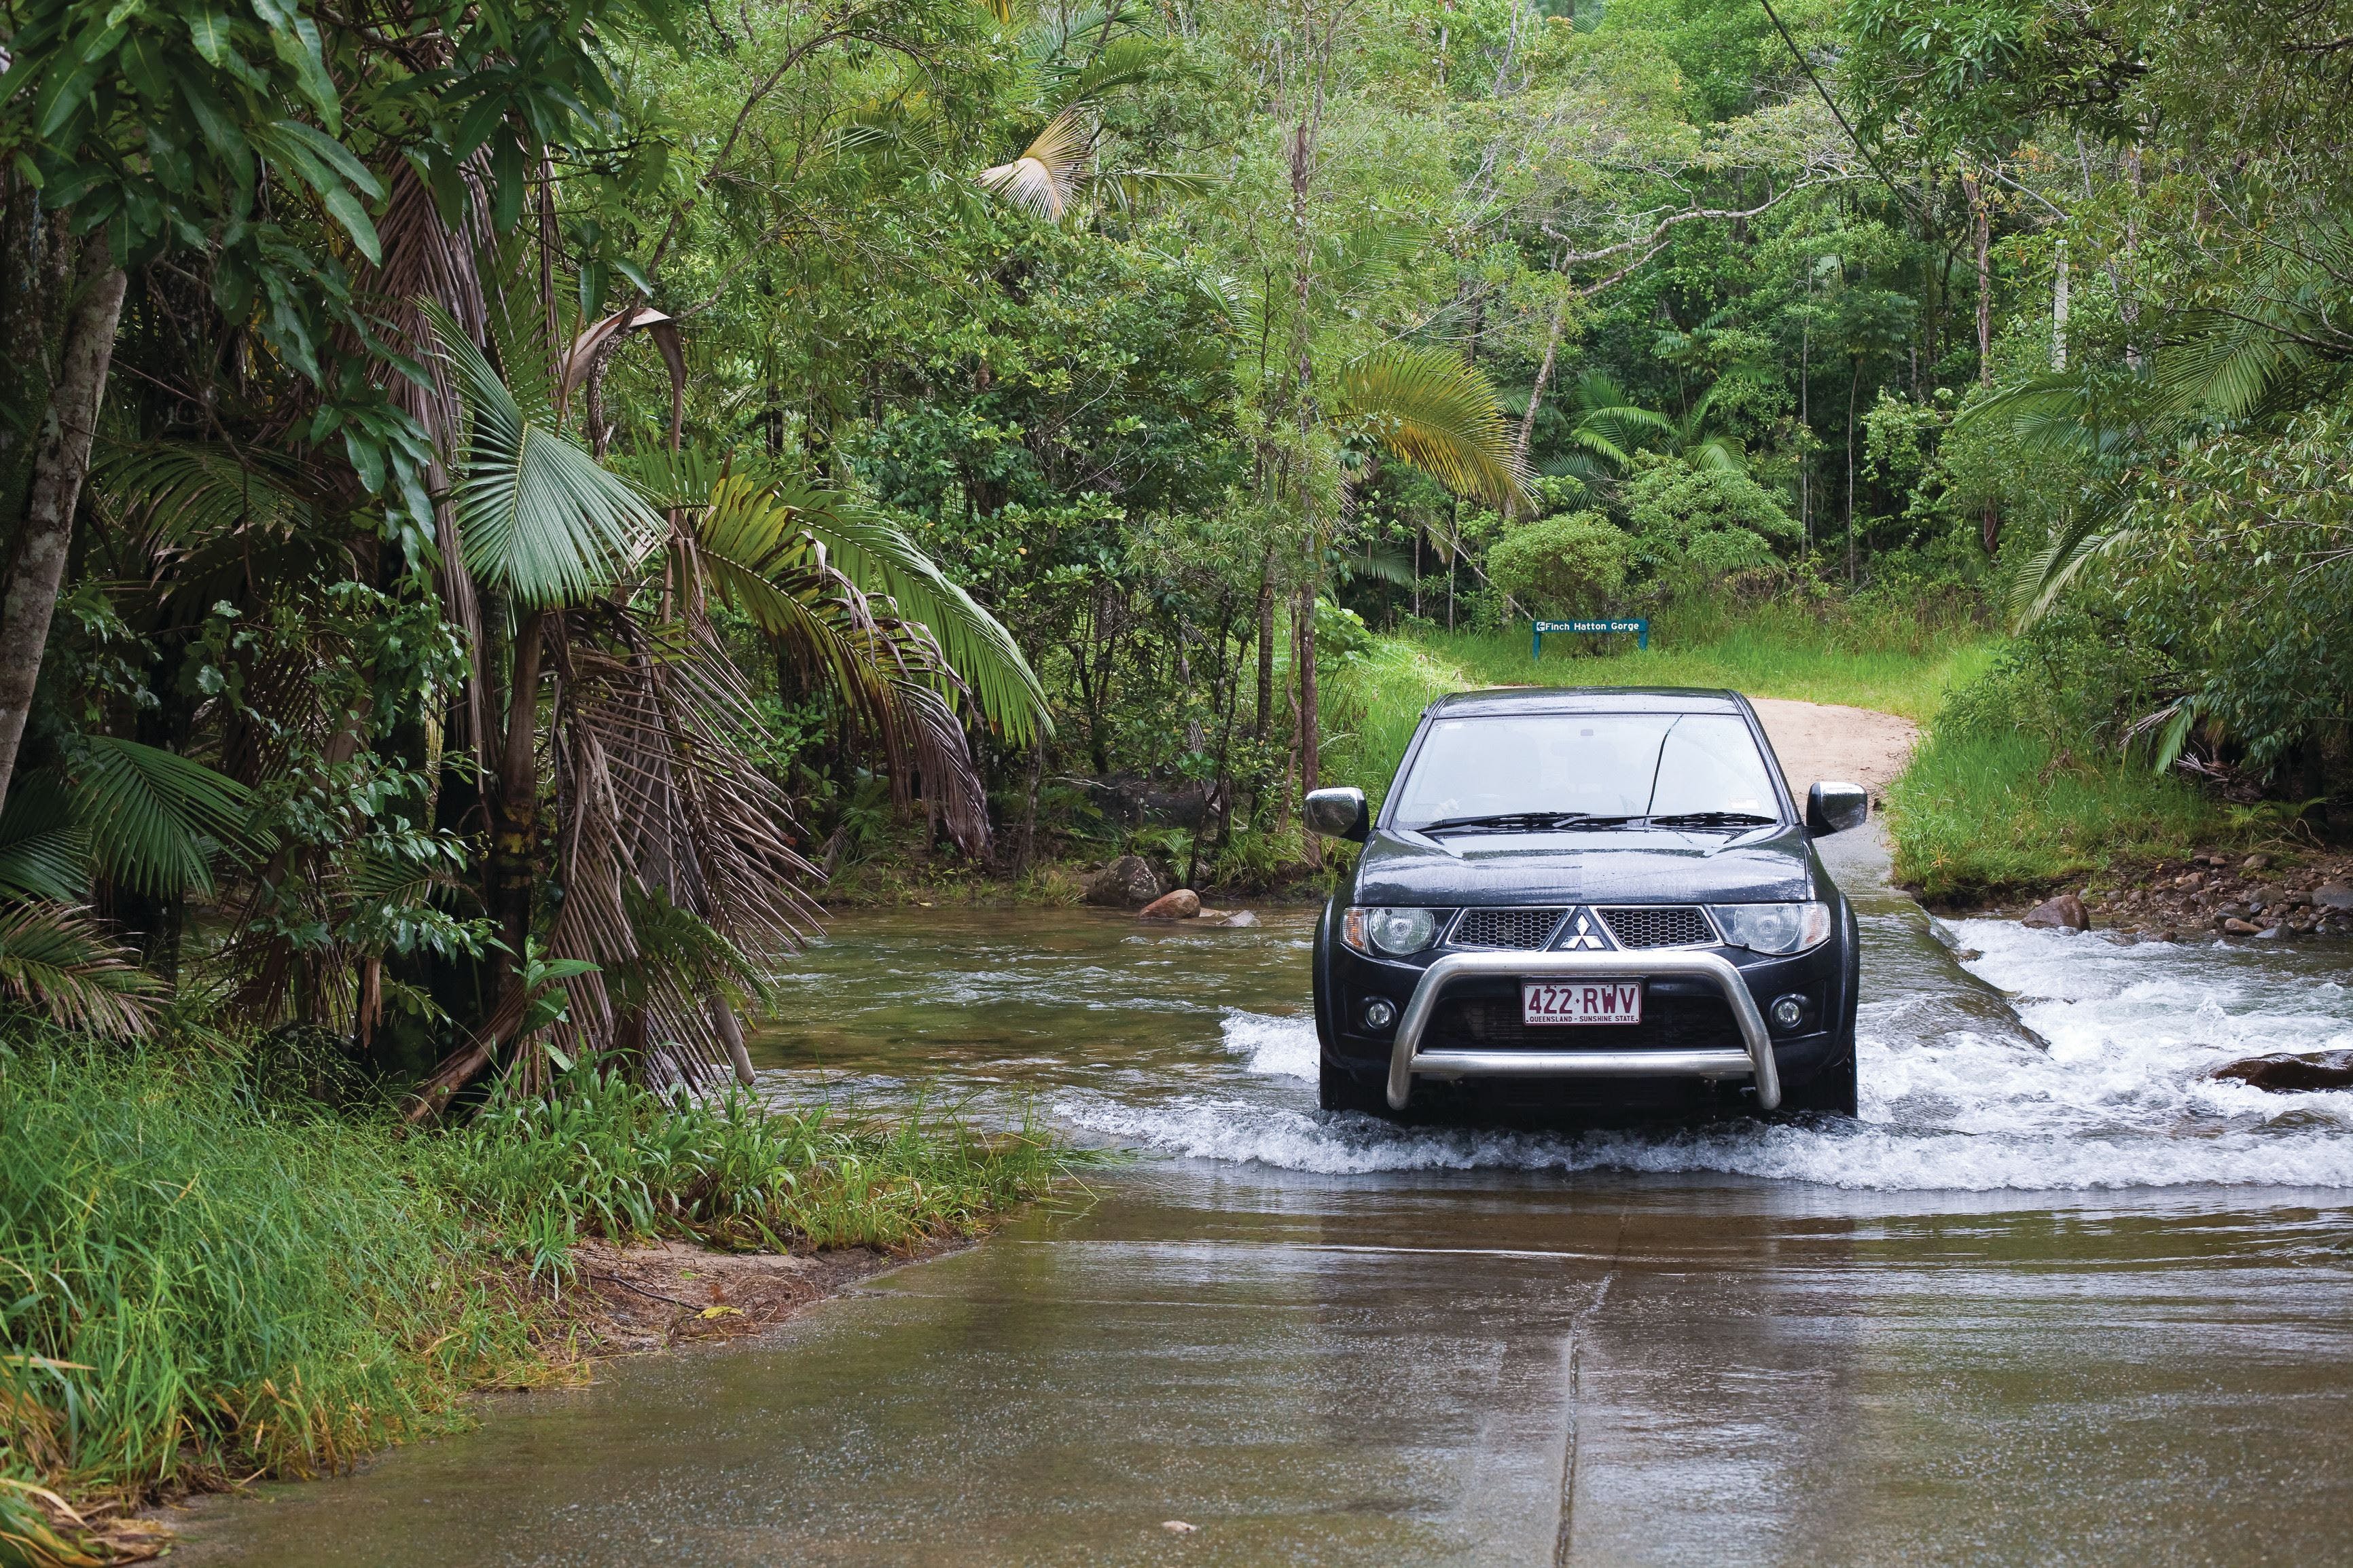 The Pioneer Valley and Eungella National Park - Accommodation Guide